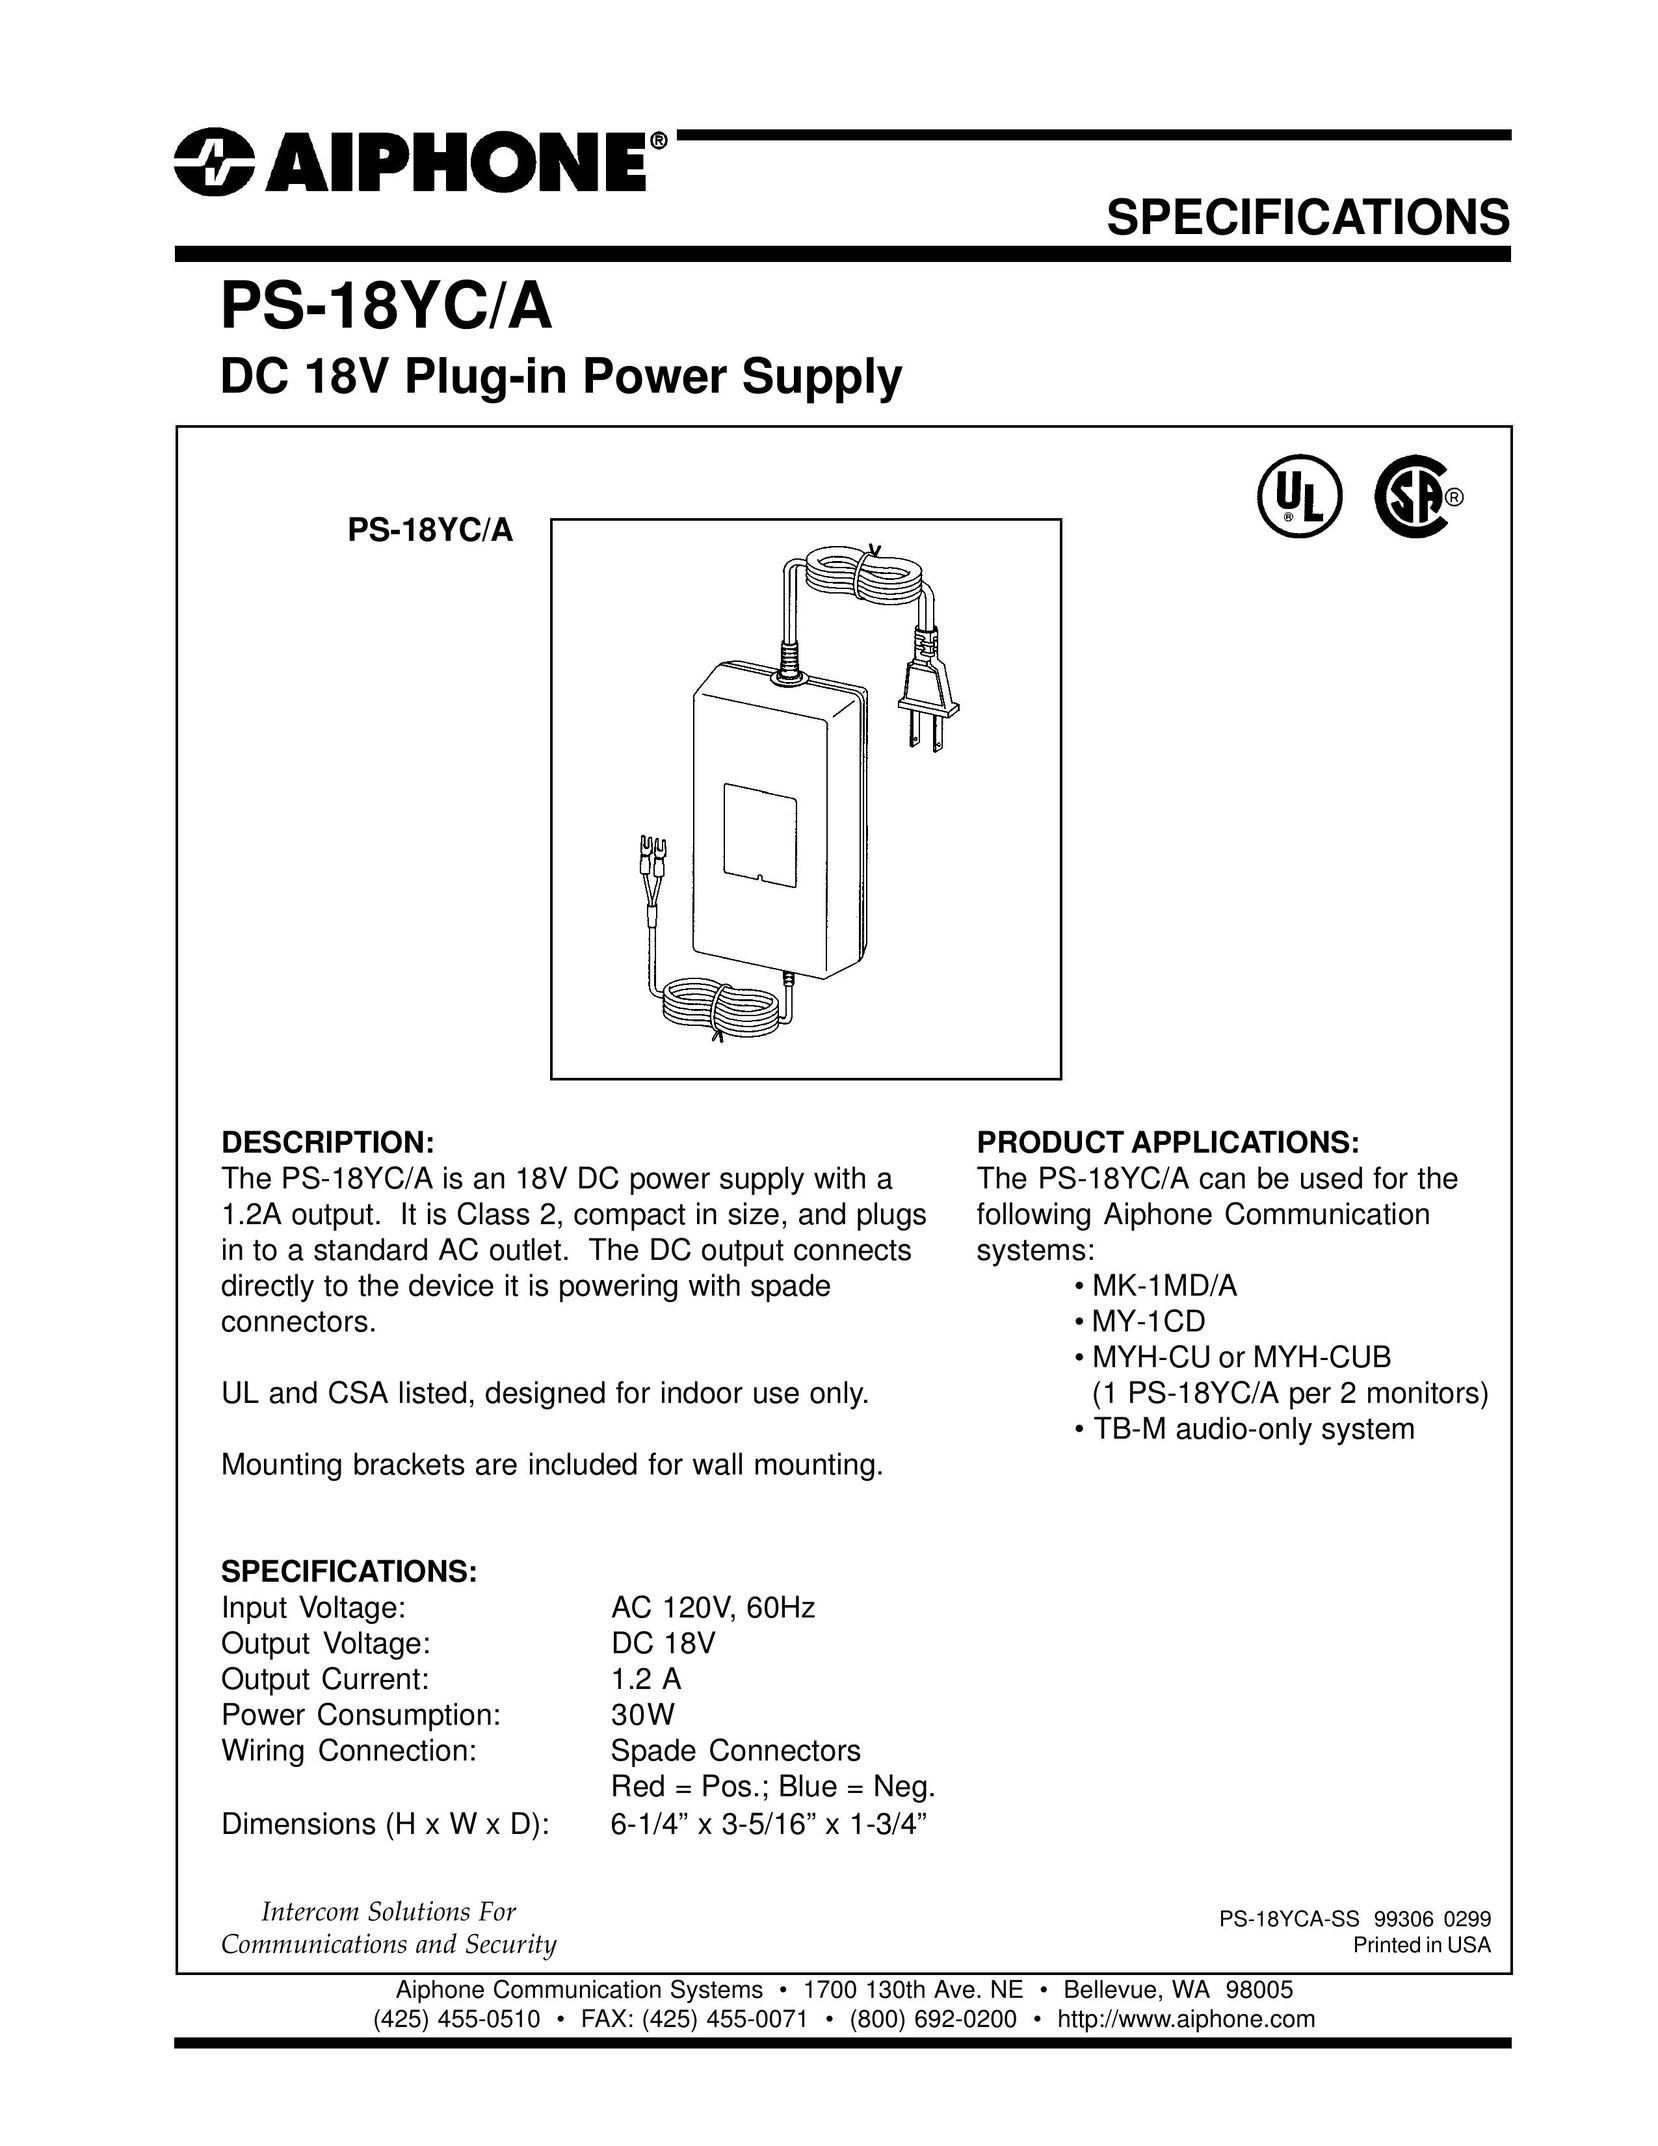 Aiphone PS-18YC/A Power Supply User Manual